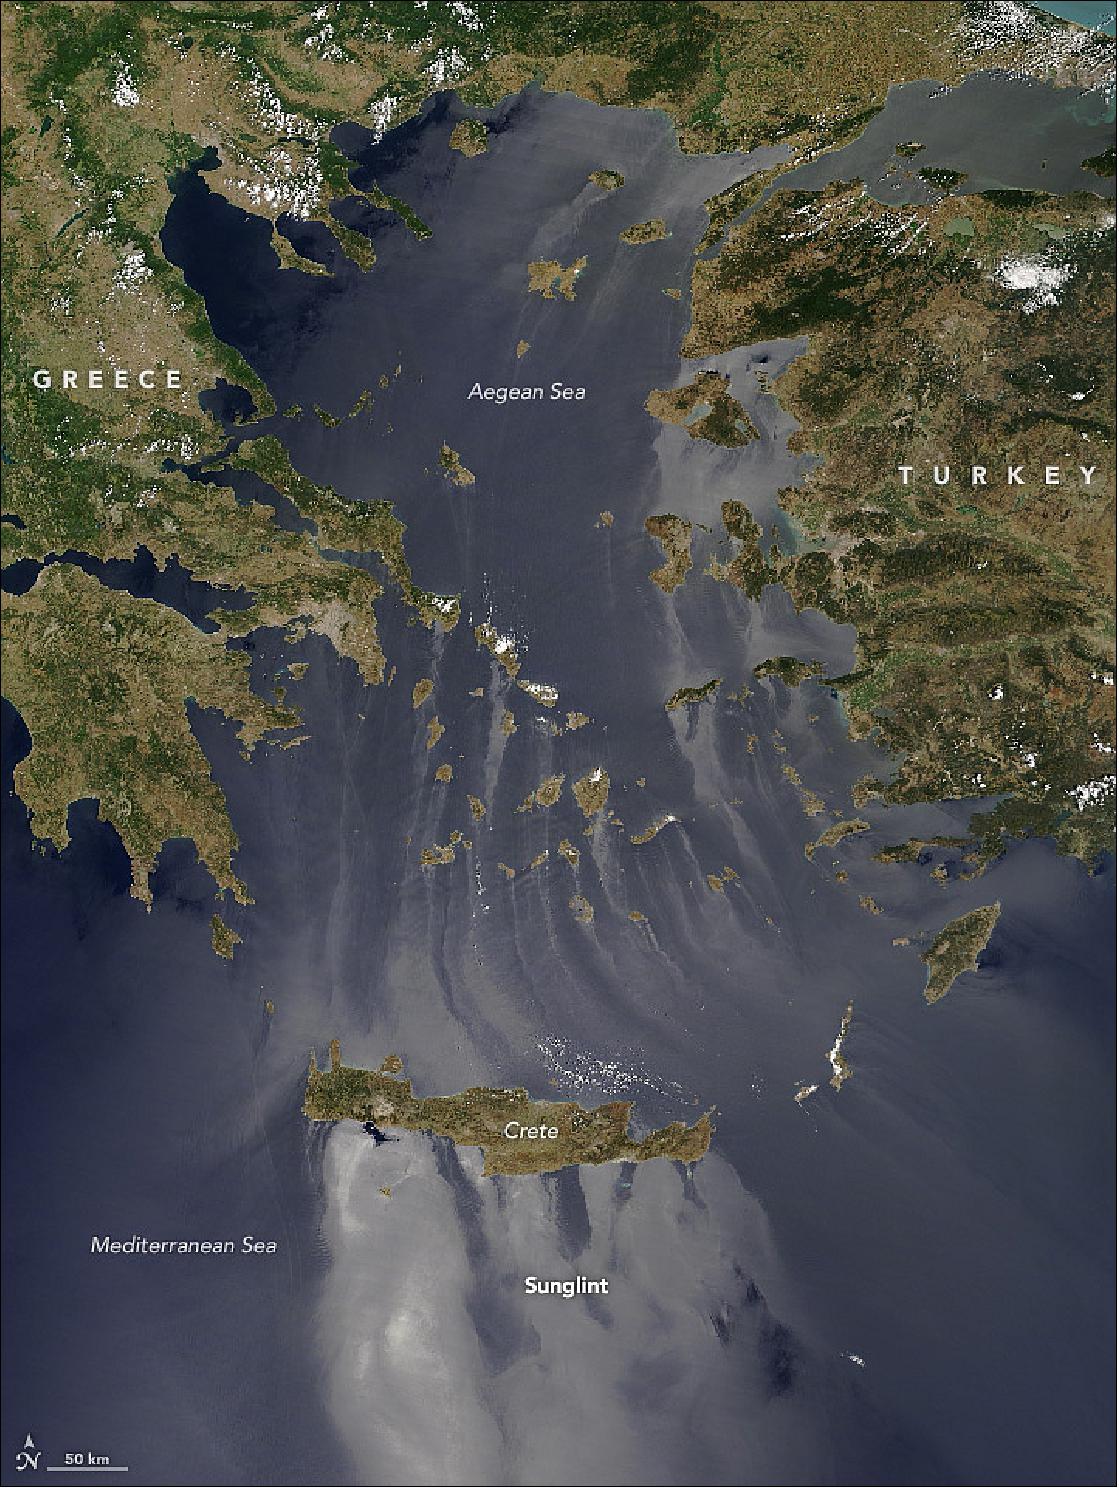 Figure 66: Sunglint image of the Aegean islands, acquired with MODIS on July 6, 2017 (image credit: NASA Earth Observatory, image by Jeff Schmaltz, caption by Kathryn Hansen)